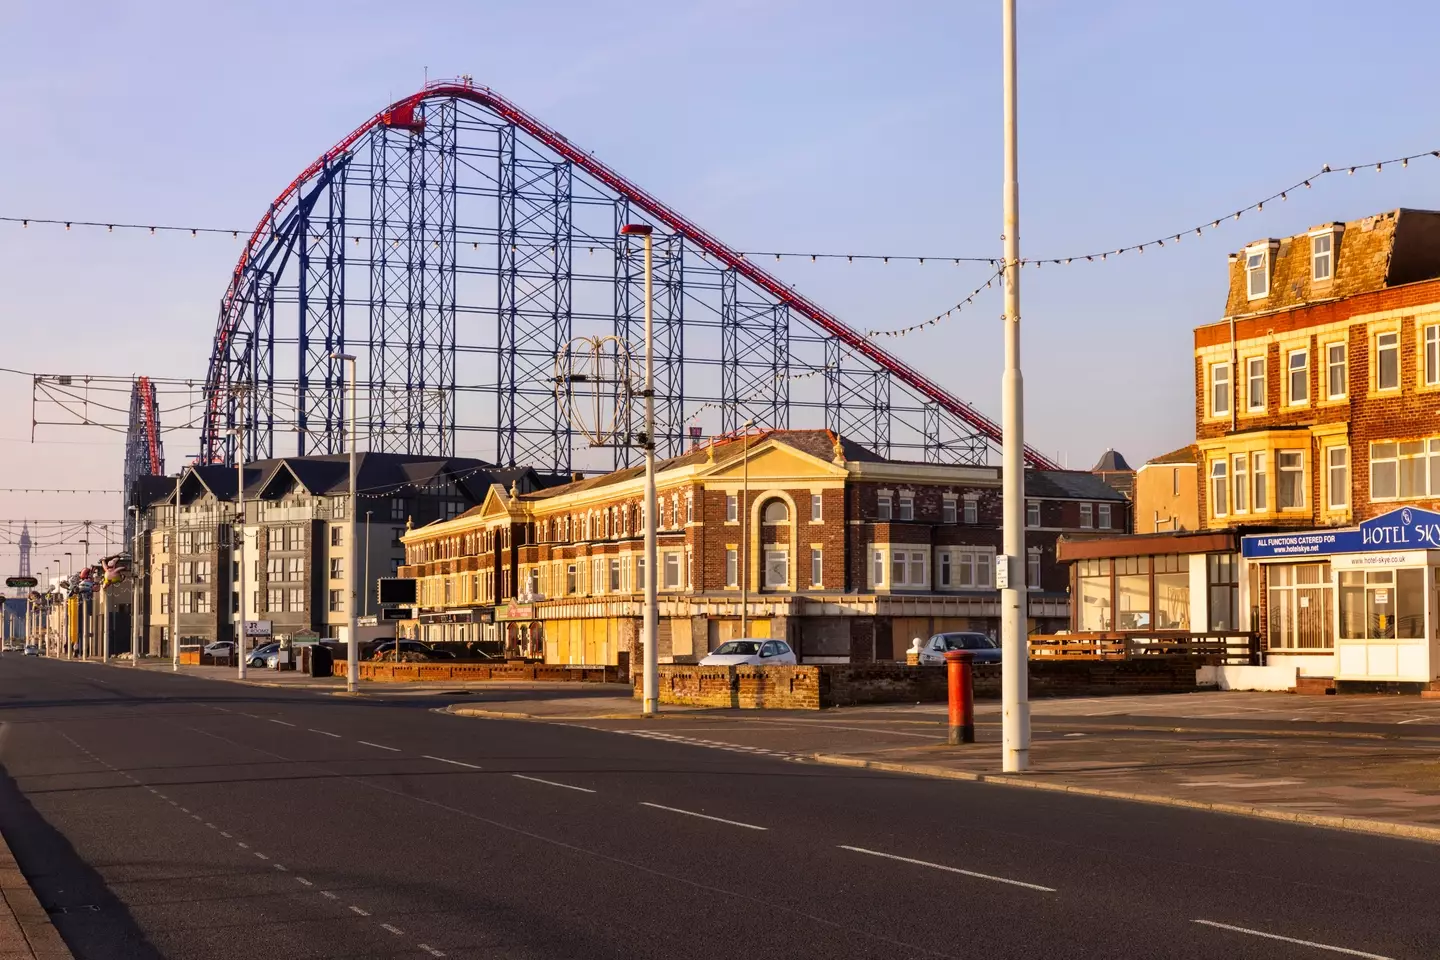 Blackpool's The Big One currently stands as the UK's tallest rollercoaster.